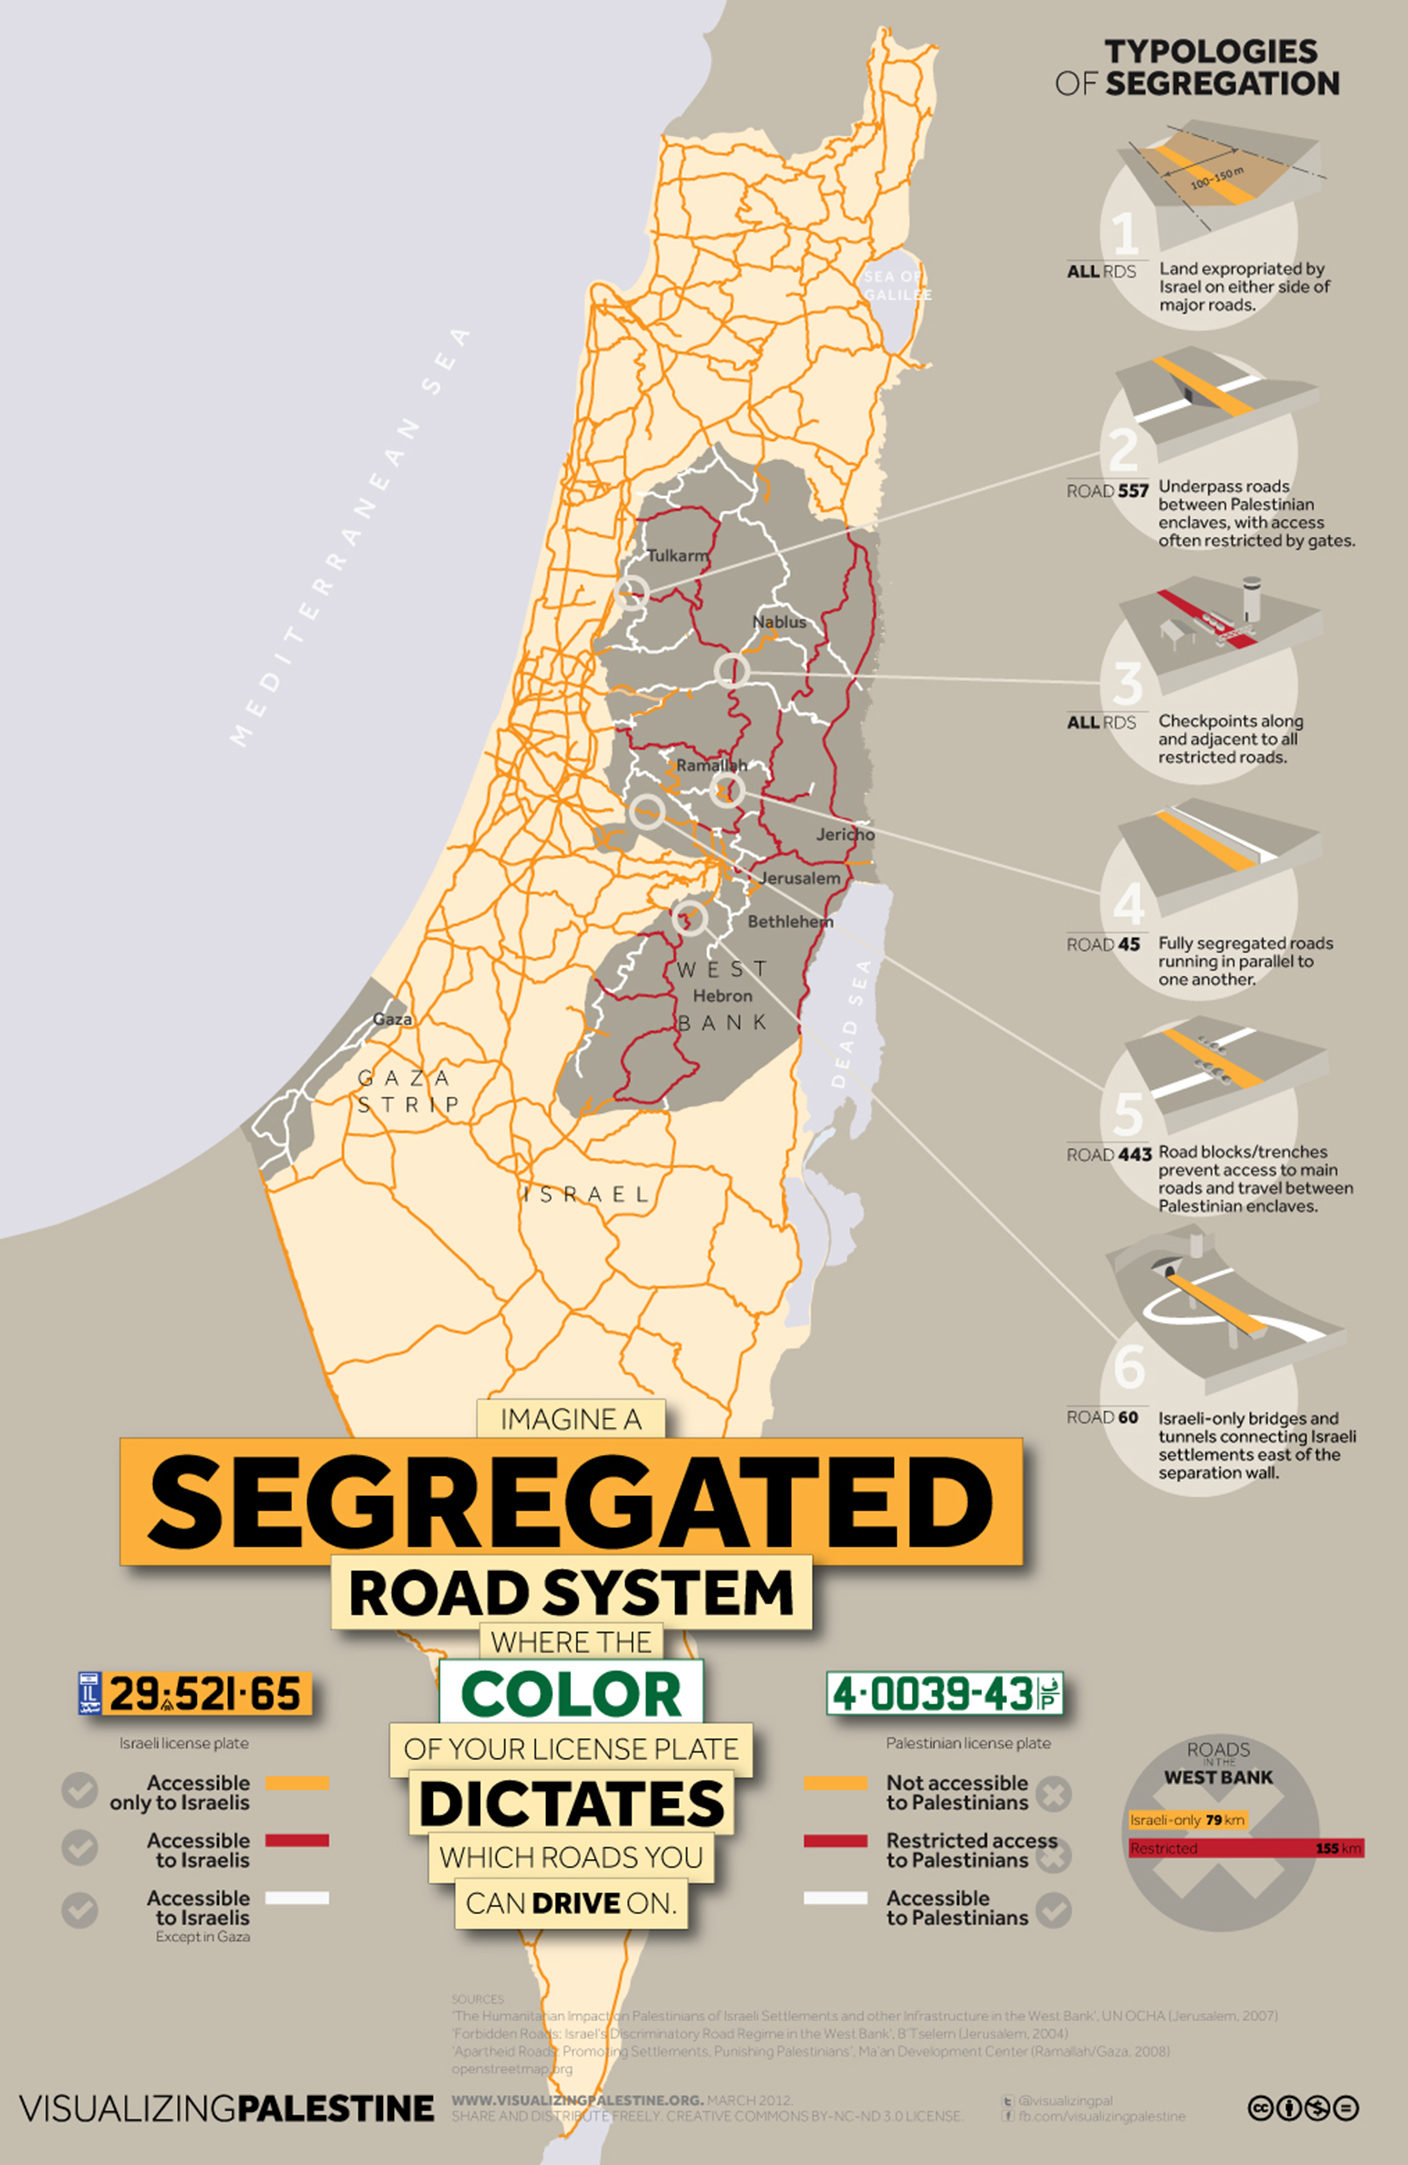 An infographic explaining road segregation enforced in Israel, Gaza and the West Bank. Bold lettering reads "Imagine a segregated road system where the color of your license plate dictates which roads you can drive on". A map is illustrated with road systems connecting different cities and territories, the roads are colour coded to show who can use them freely. Orange roads are accessible only to Israelis, and cannot be used by Palestinians. Red roads have restrictions on use by Palestinians, and white roads can be used by Palestinians. The mapped roads are overwhelmingly orange and red, white roads are frequently intercepted by restricted roads. The infographic explains some methods of restriction and segregation with small graphics lining the right of the image. The six small diagrams include roads restricted by gates, roads with multiple checkpoints or roadblocks in place, and segregated roads which run parallel to one another.